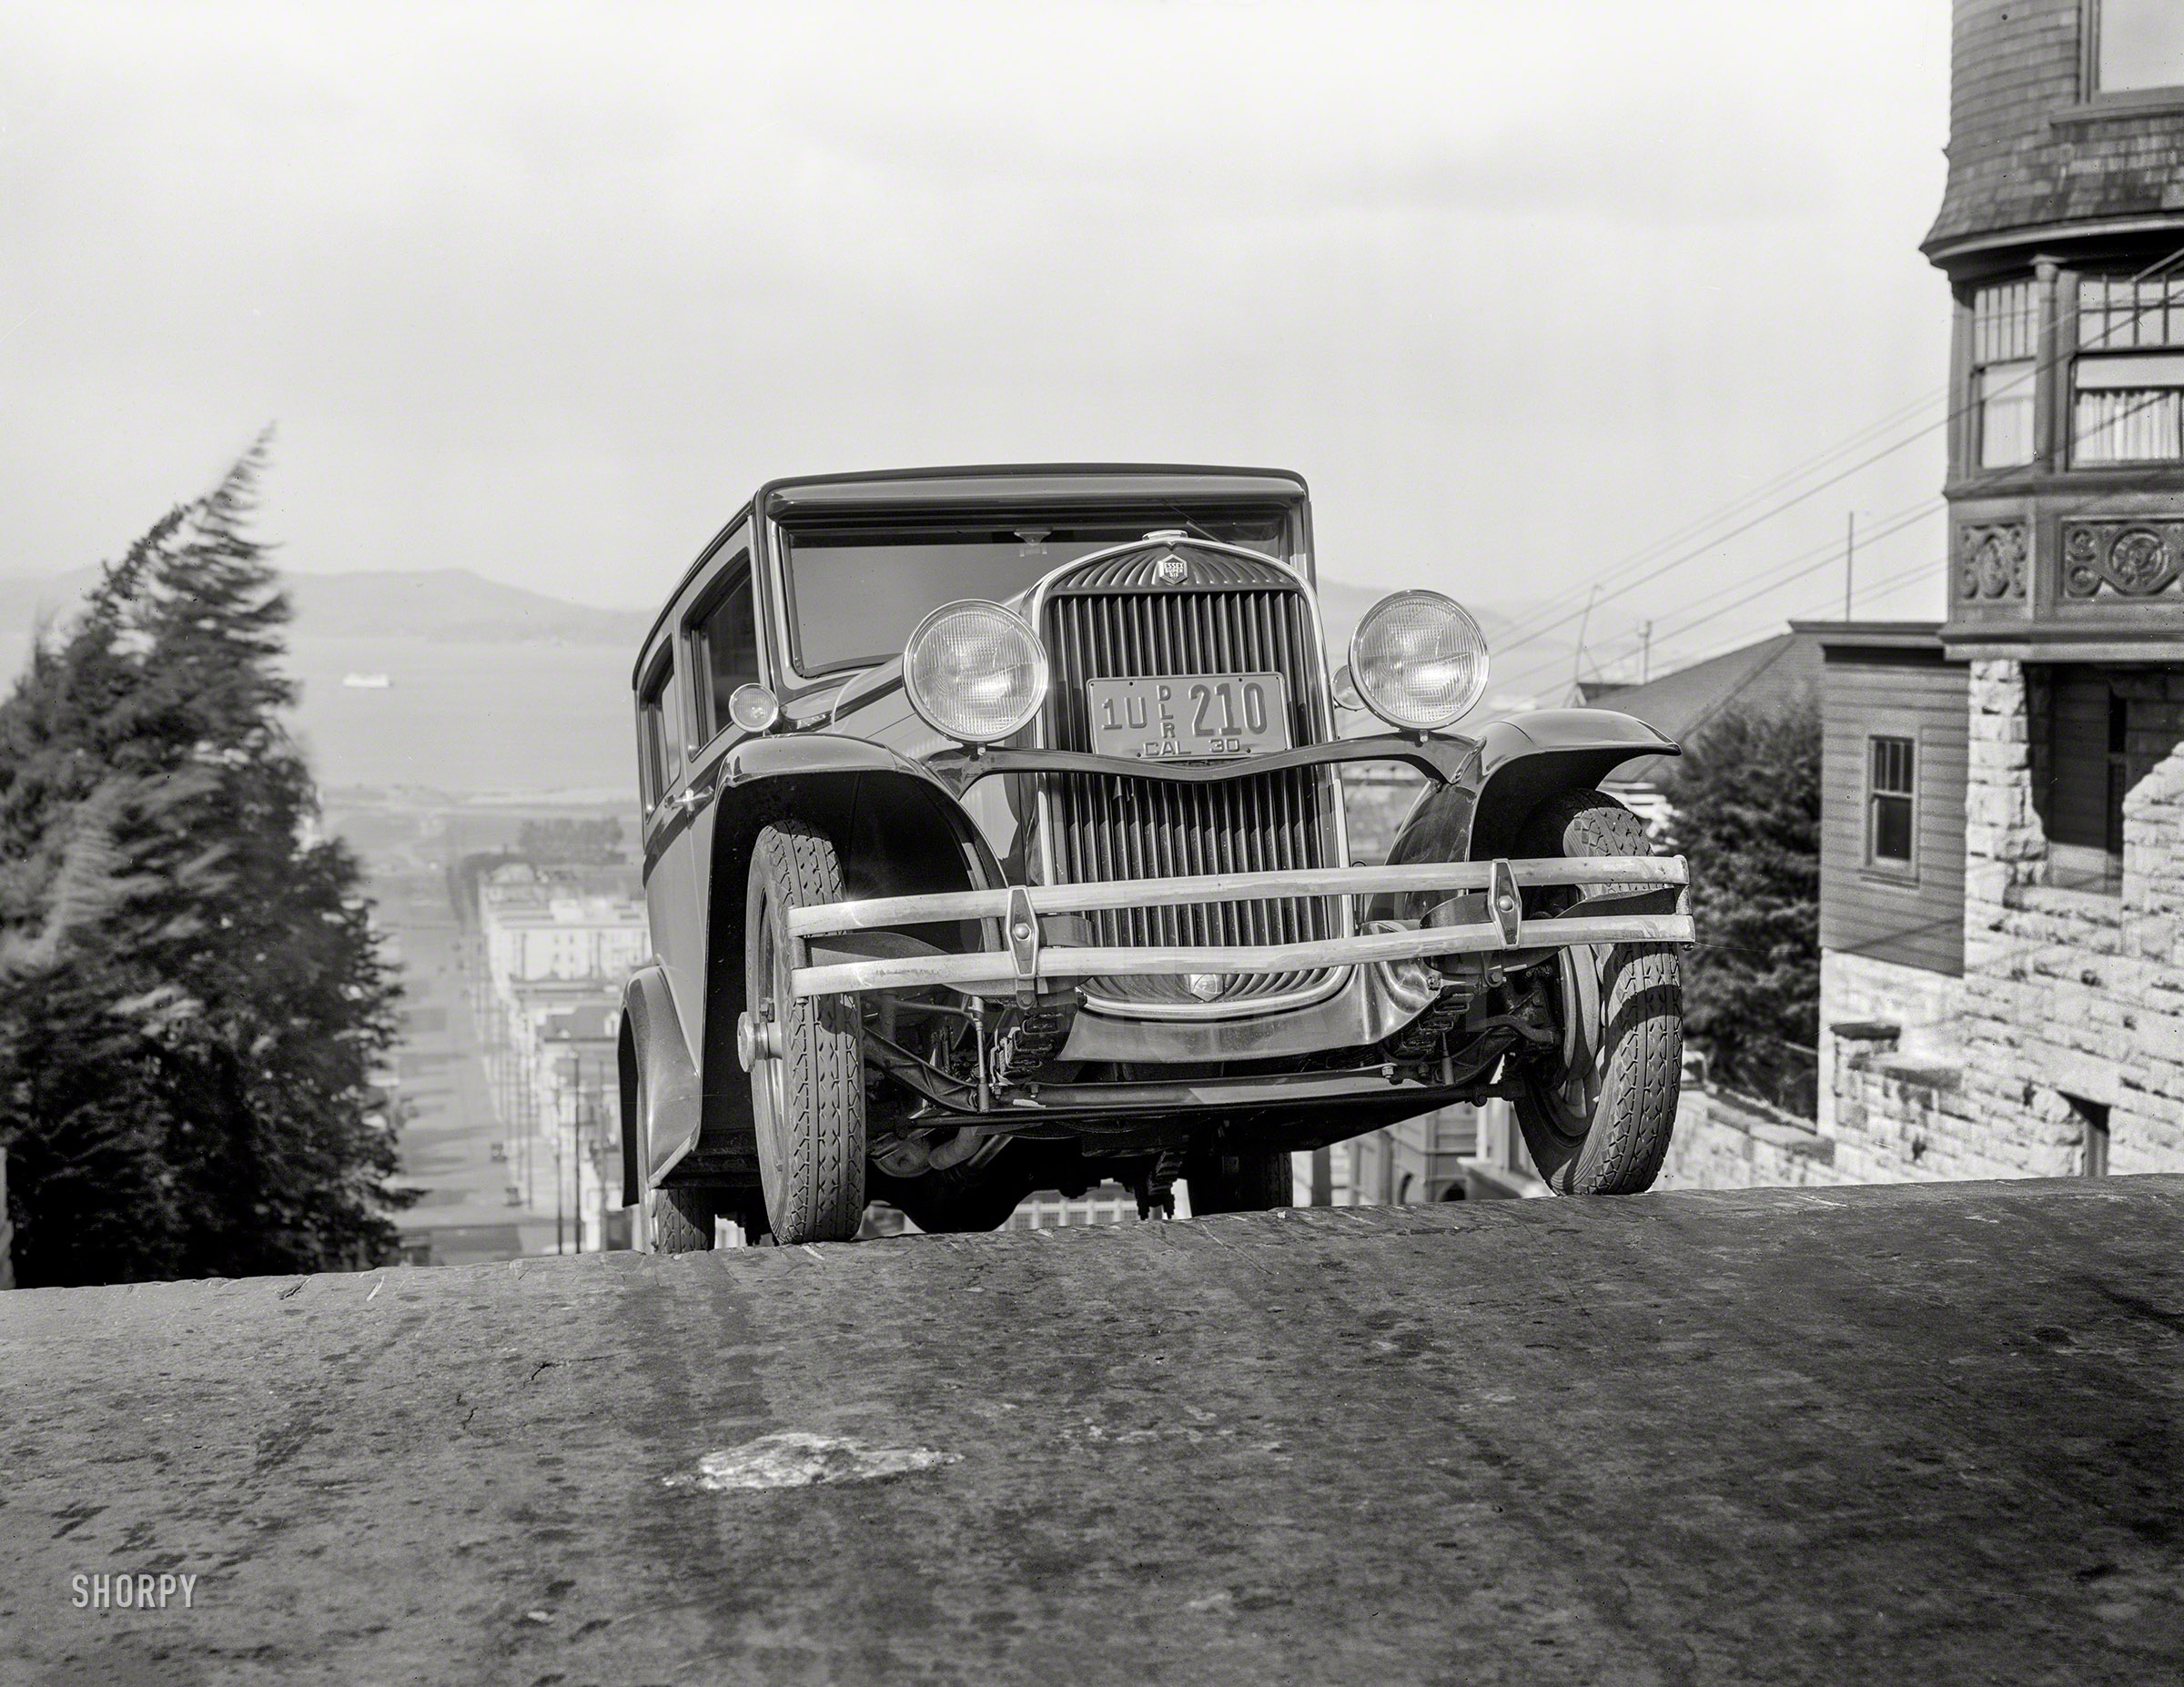 San Francisco, 1930. "Essex Super Six climbing Webster Street hill." Latest display in the Shorpy Diorama of Discontinued Dreadnoughts. 5x7 inch glass negative by automotive impresario Christopher Helin. View full size.